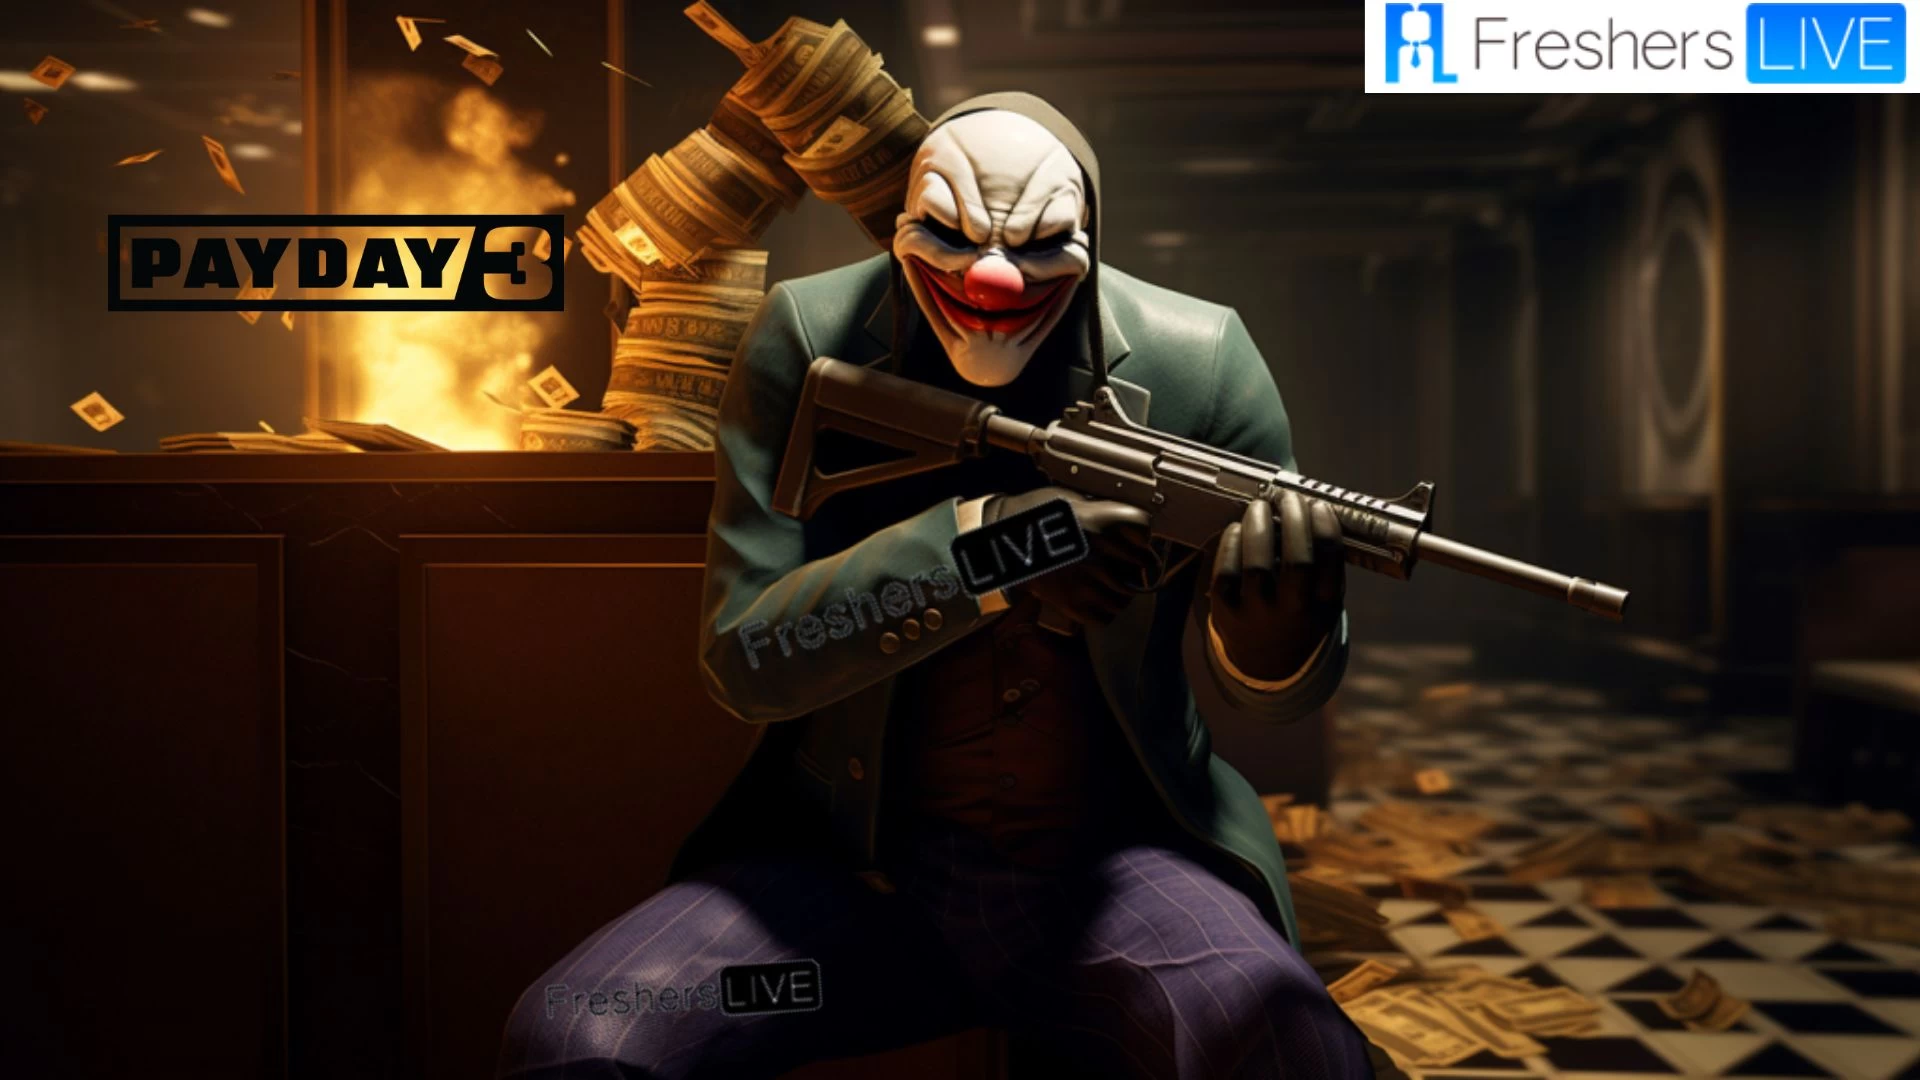 How to Level Up in Payday 3? A Complete Guide